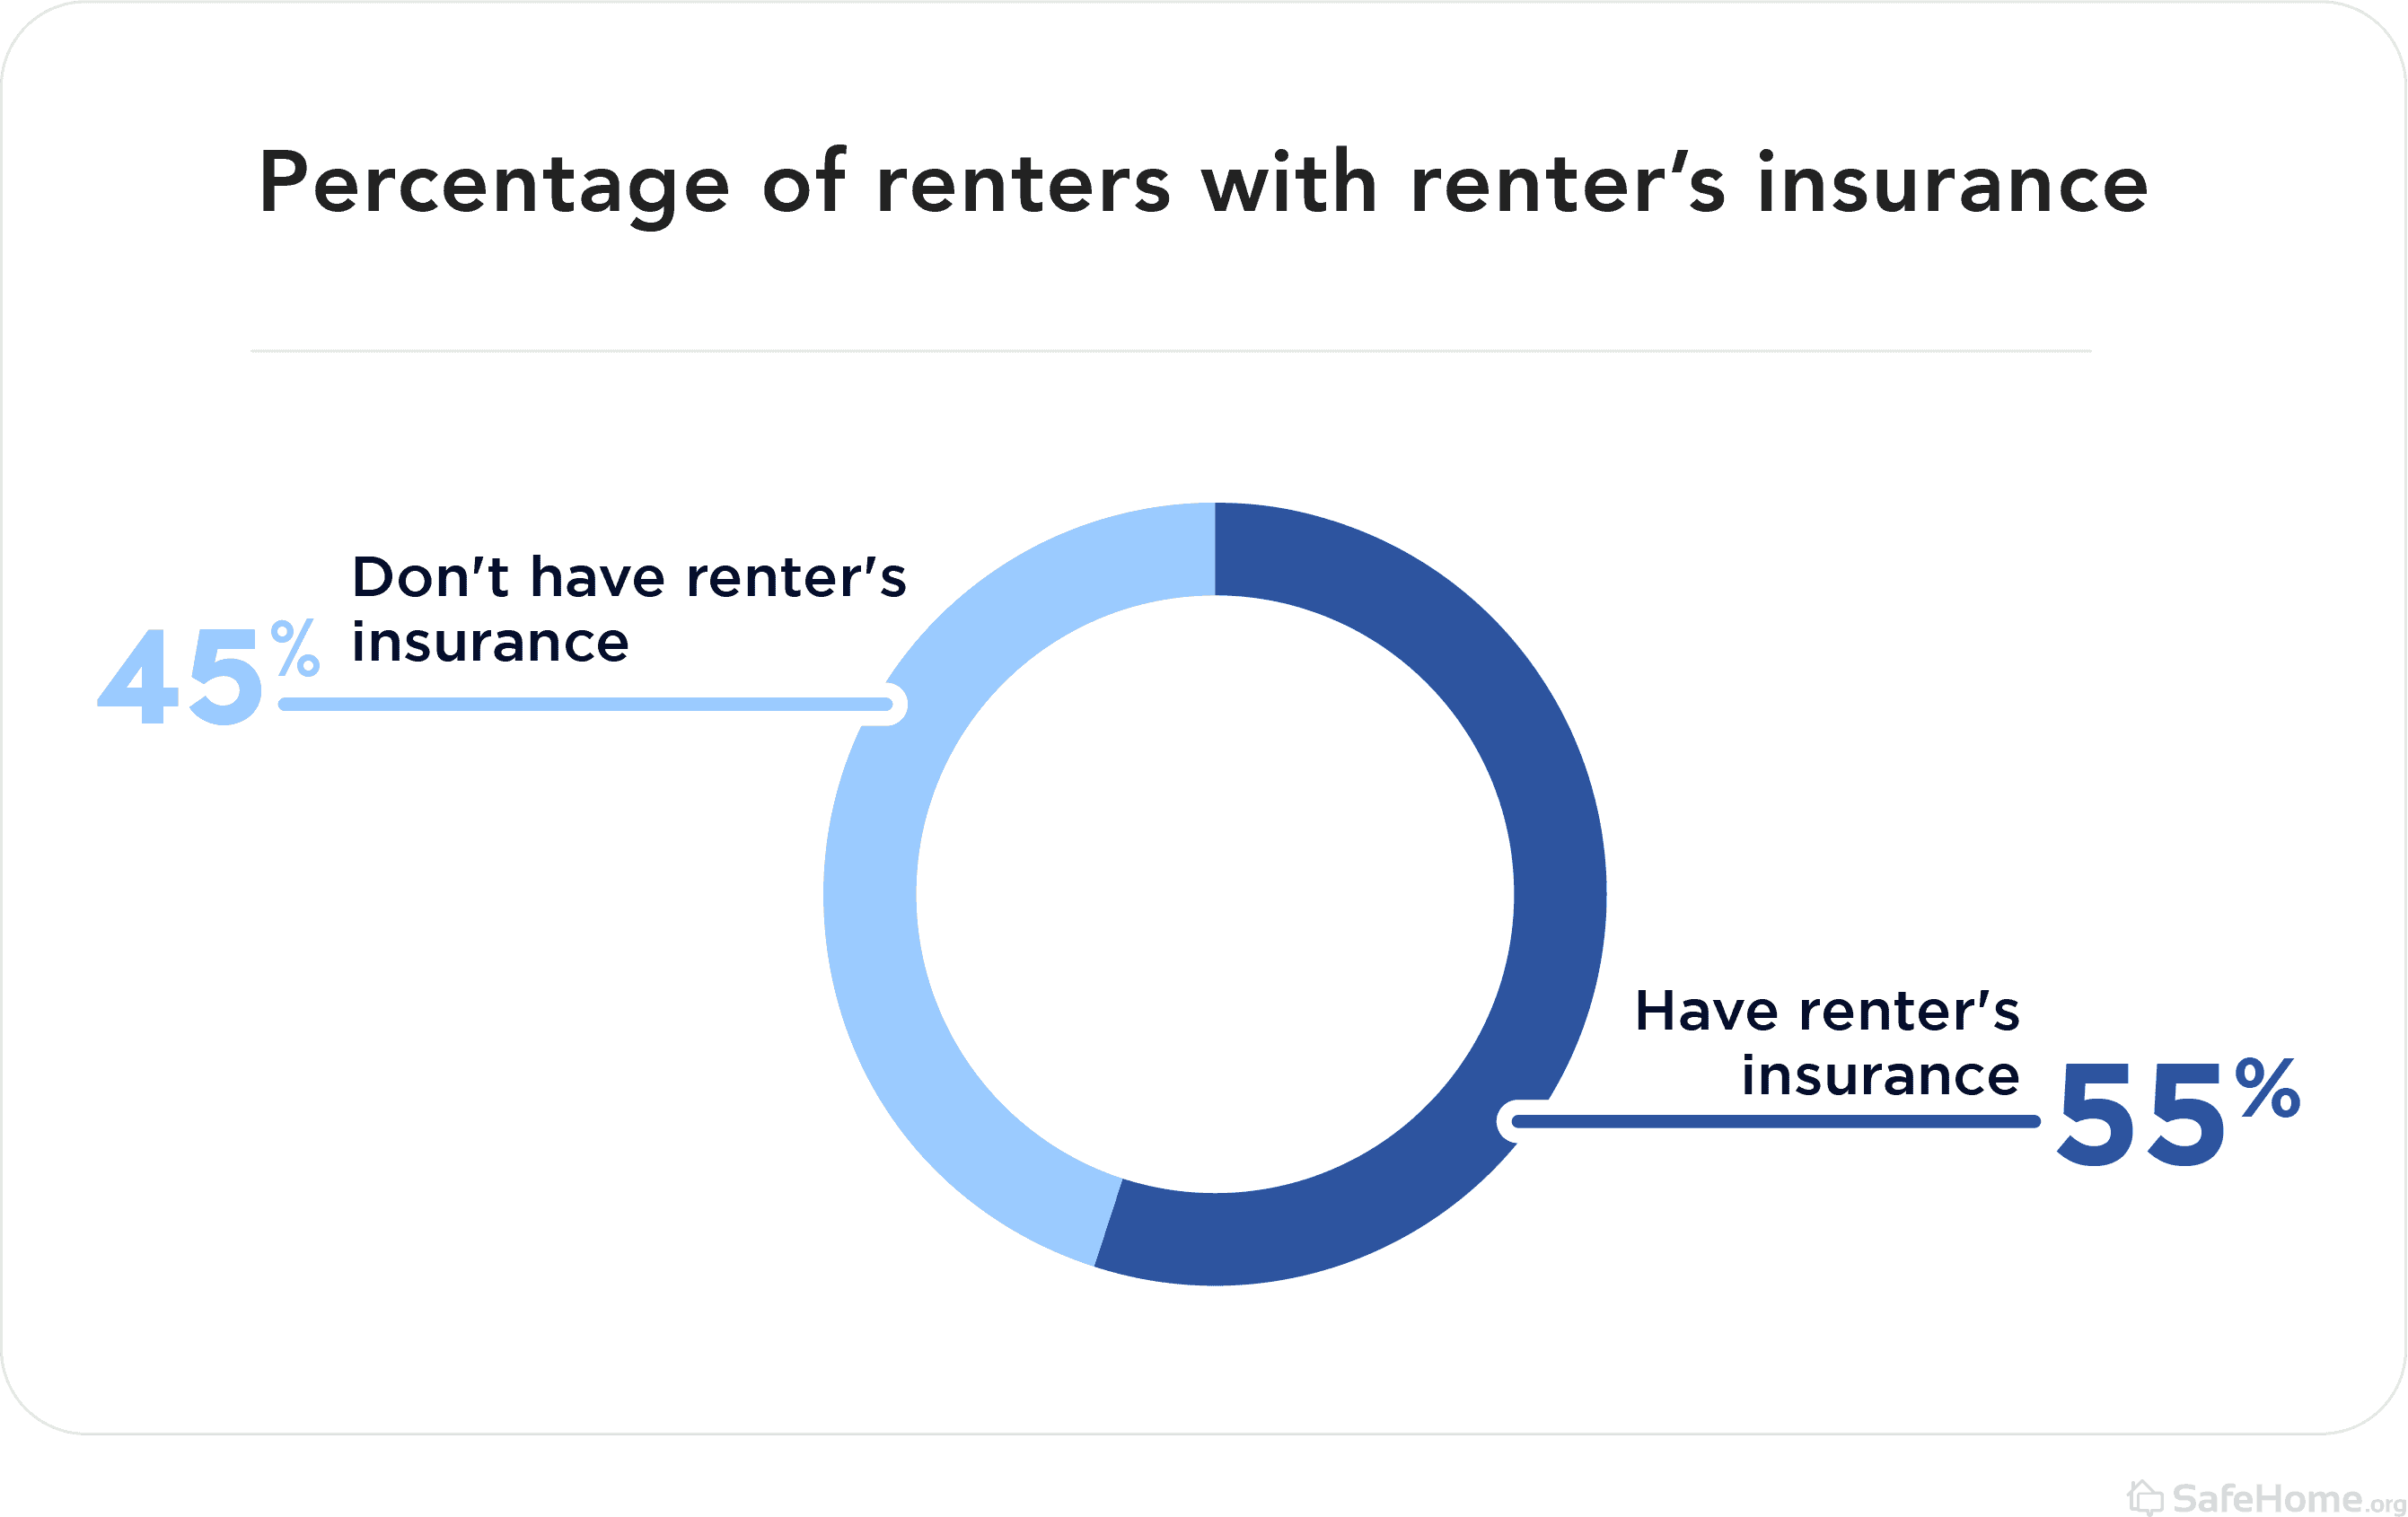 Percentage of renters with renter insurance